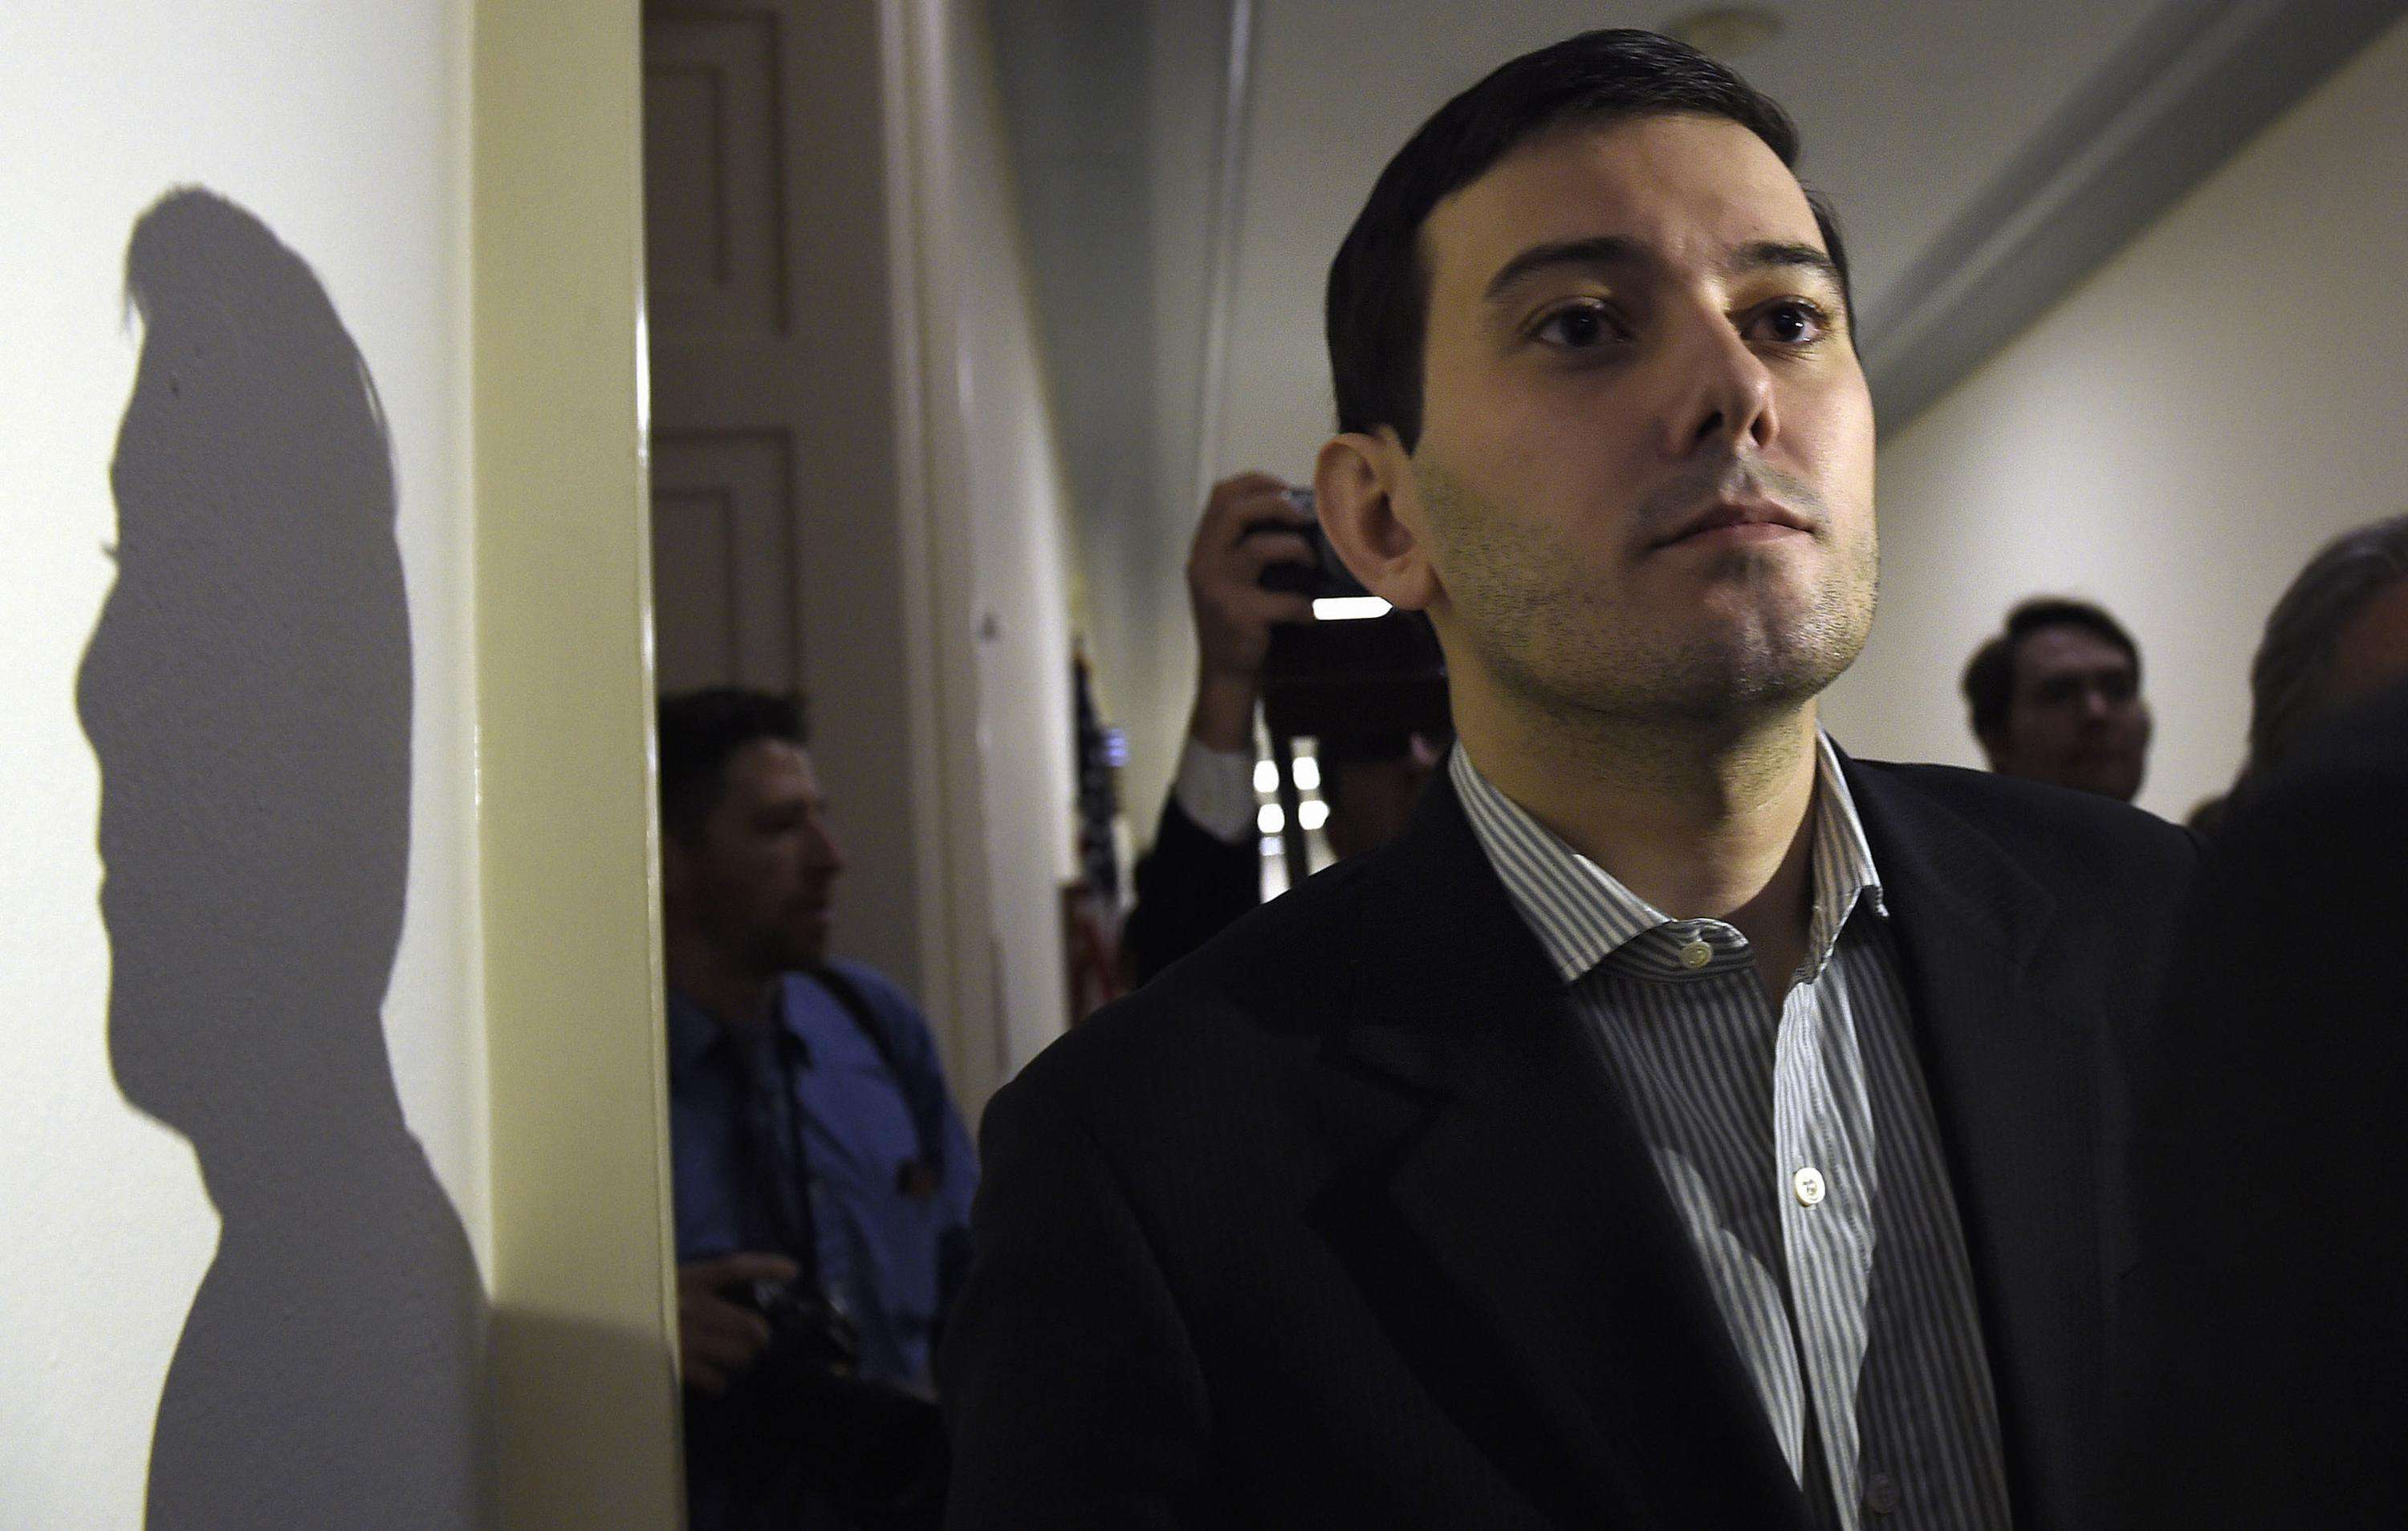 image for Shkreli ordered to return $64M, is barred from drug industry